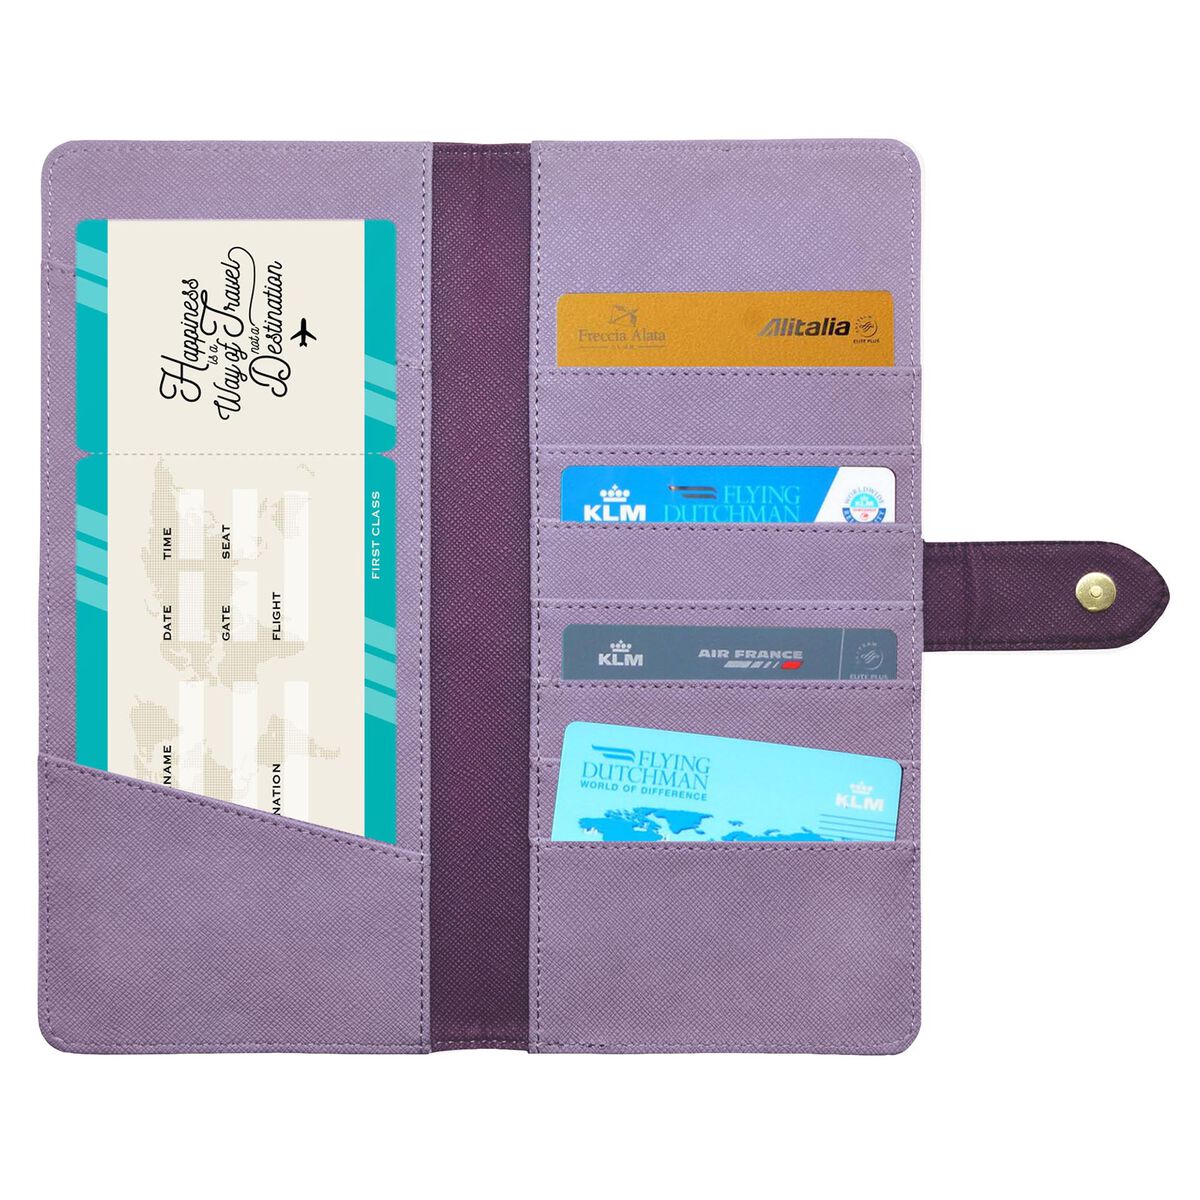 Legami Travel Organiser | Lilac Inside | Unique Gift Ideas for Her | for Mom | for Women | for Females | for Wife | for Sister | for Girlfriend | for Grandma | for Friends | for Birthday | Gifting Made Simple